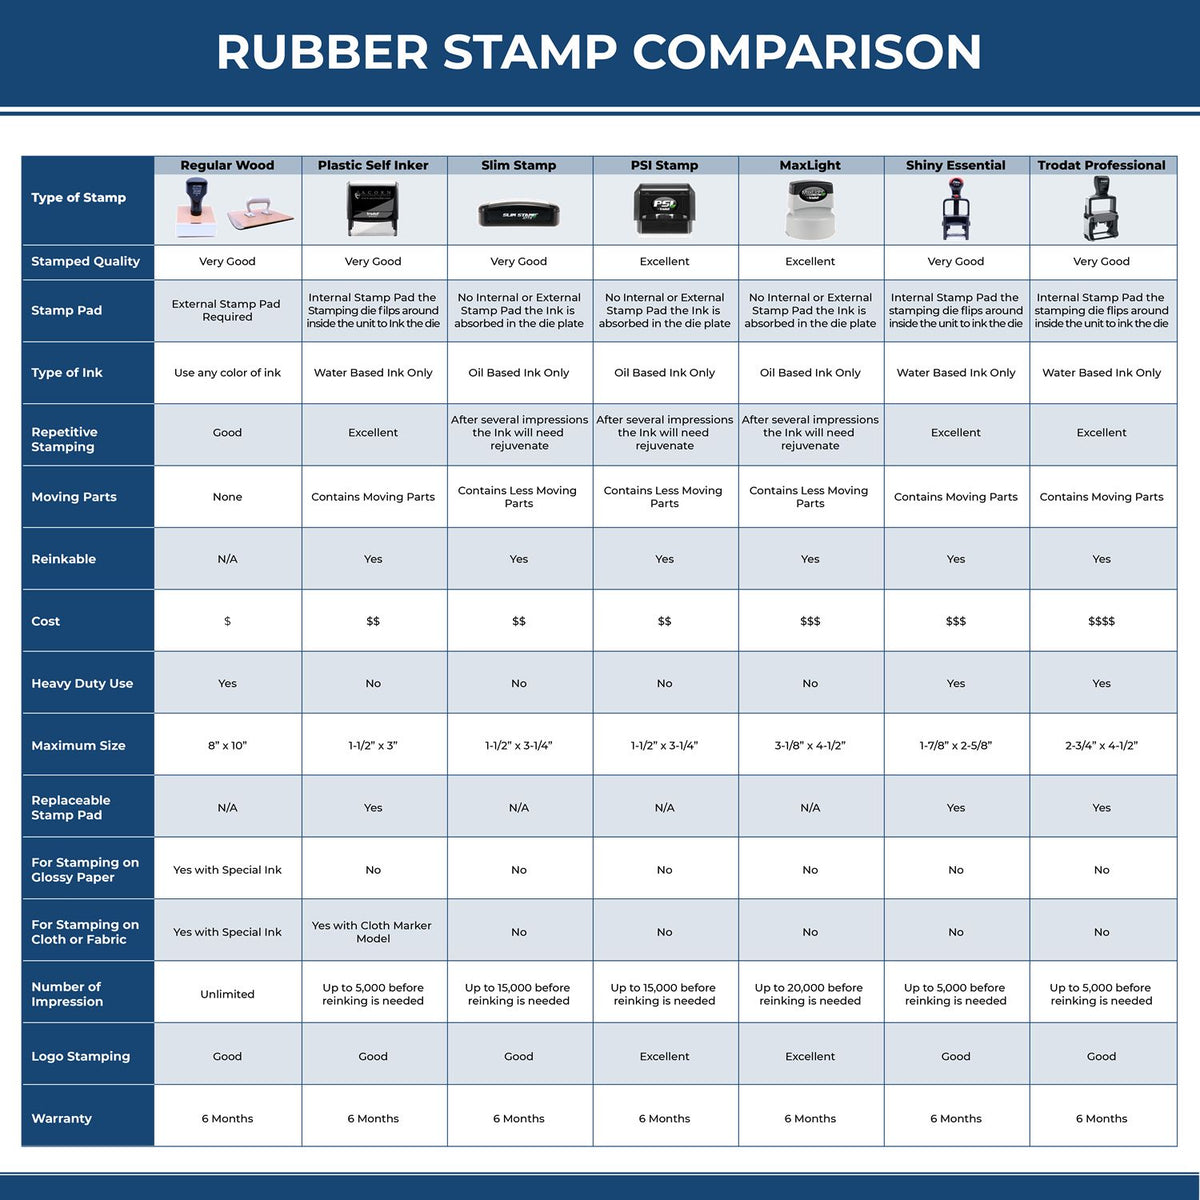 A comparison chart for the different types of mount models available for the Premium MaxLight Pre-Inked Tennessee Landscape Architectural Stamp.